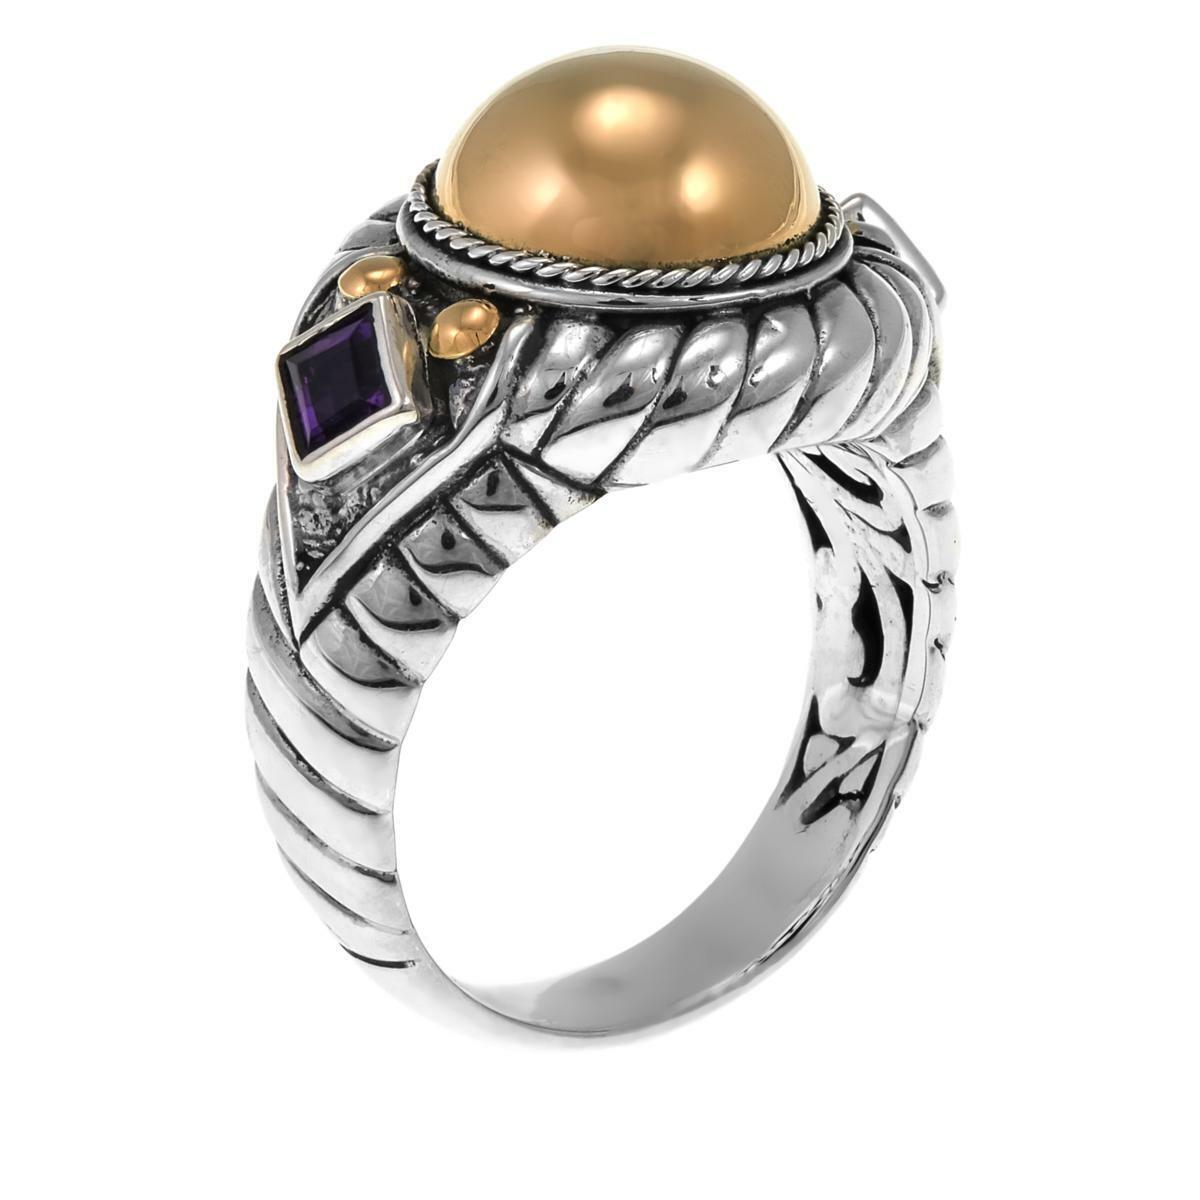 Bali Designs 2-Tone 0.22Ctw Amethyst Cable-Twist Ring Size 9 Hsn $221